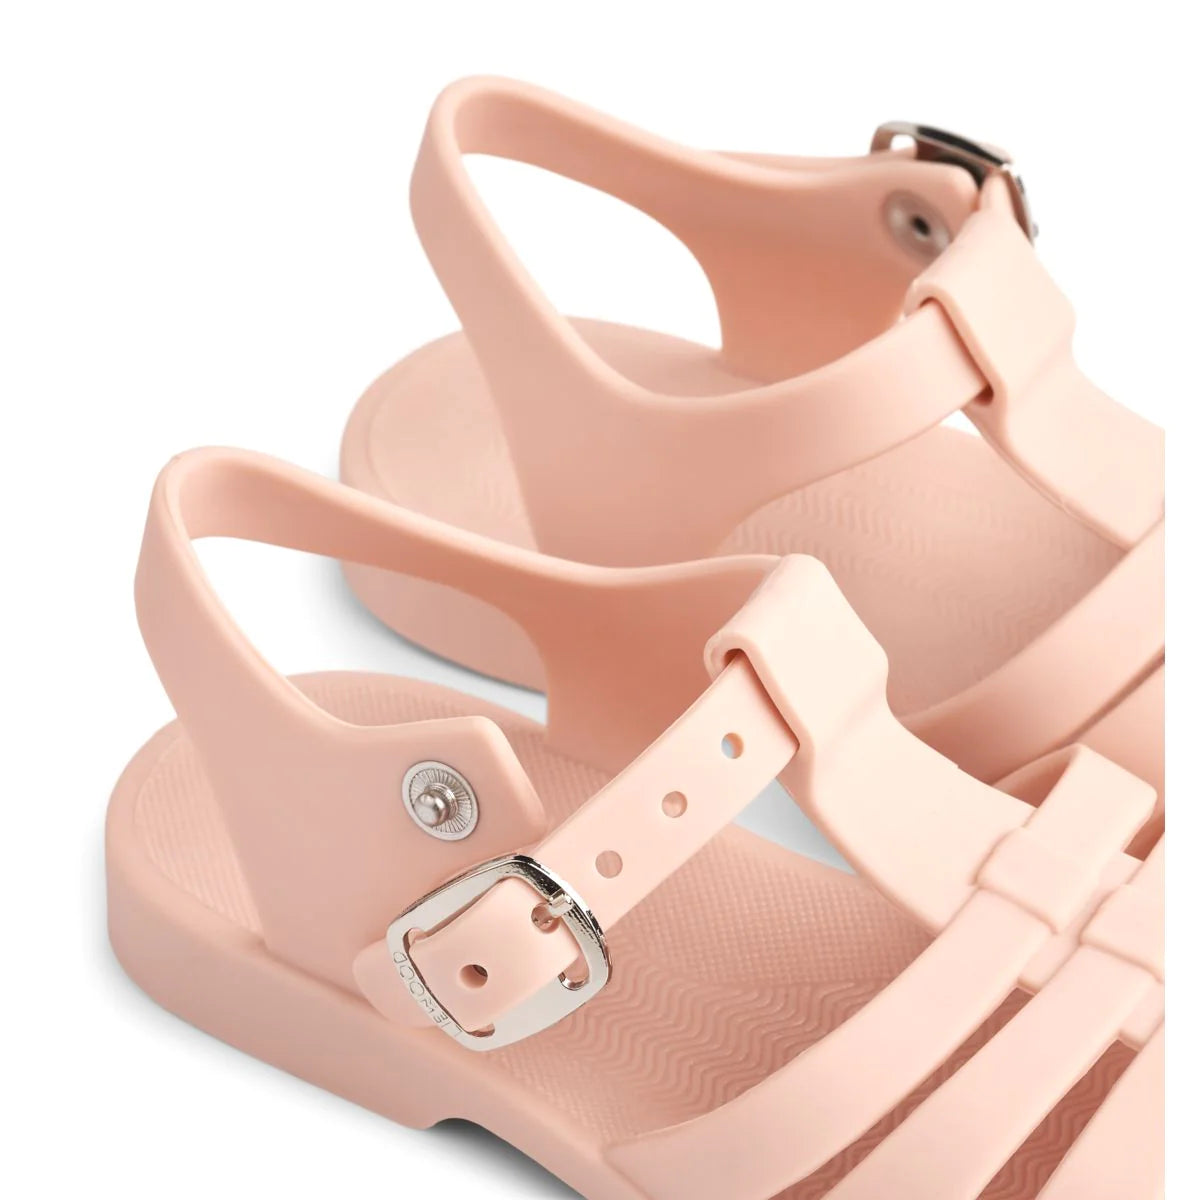 Load image into Gallery viewer, Bre Beach Sandals in Sorbet Rose
